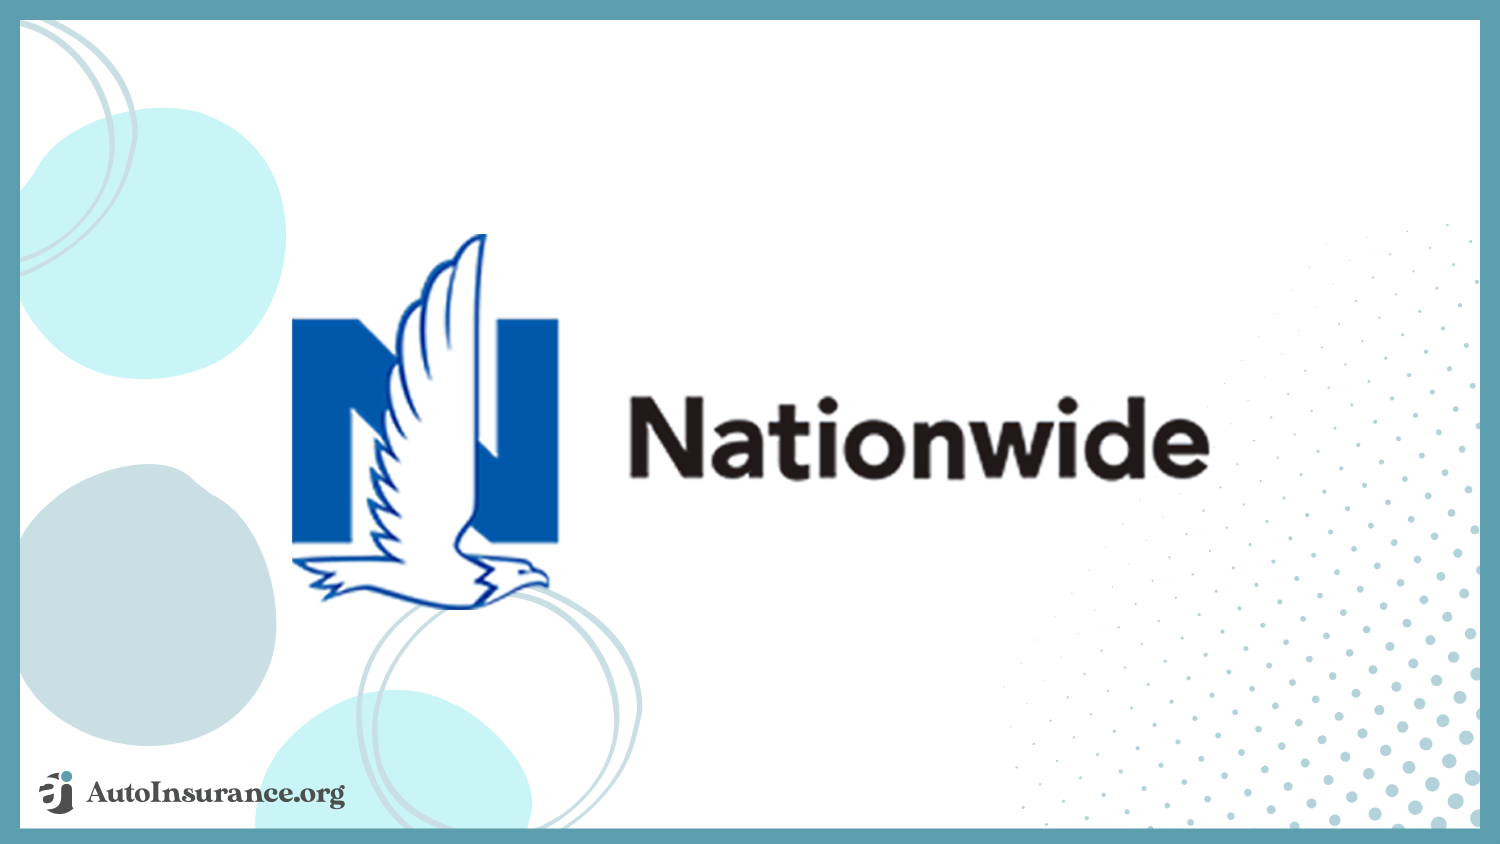 Nationwide: Best Auto Insurance for Cancer Patients